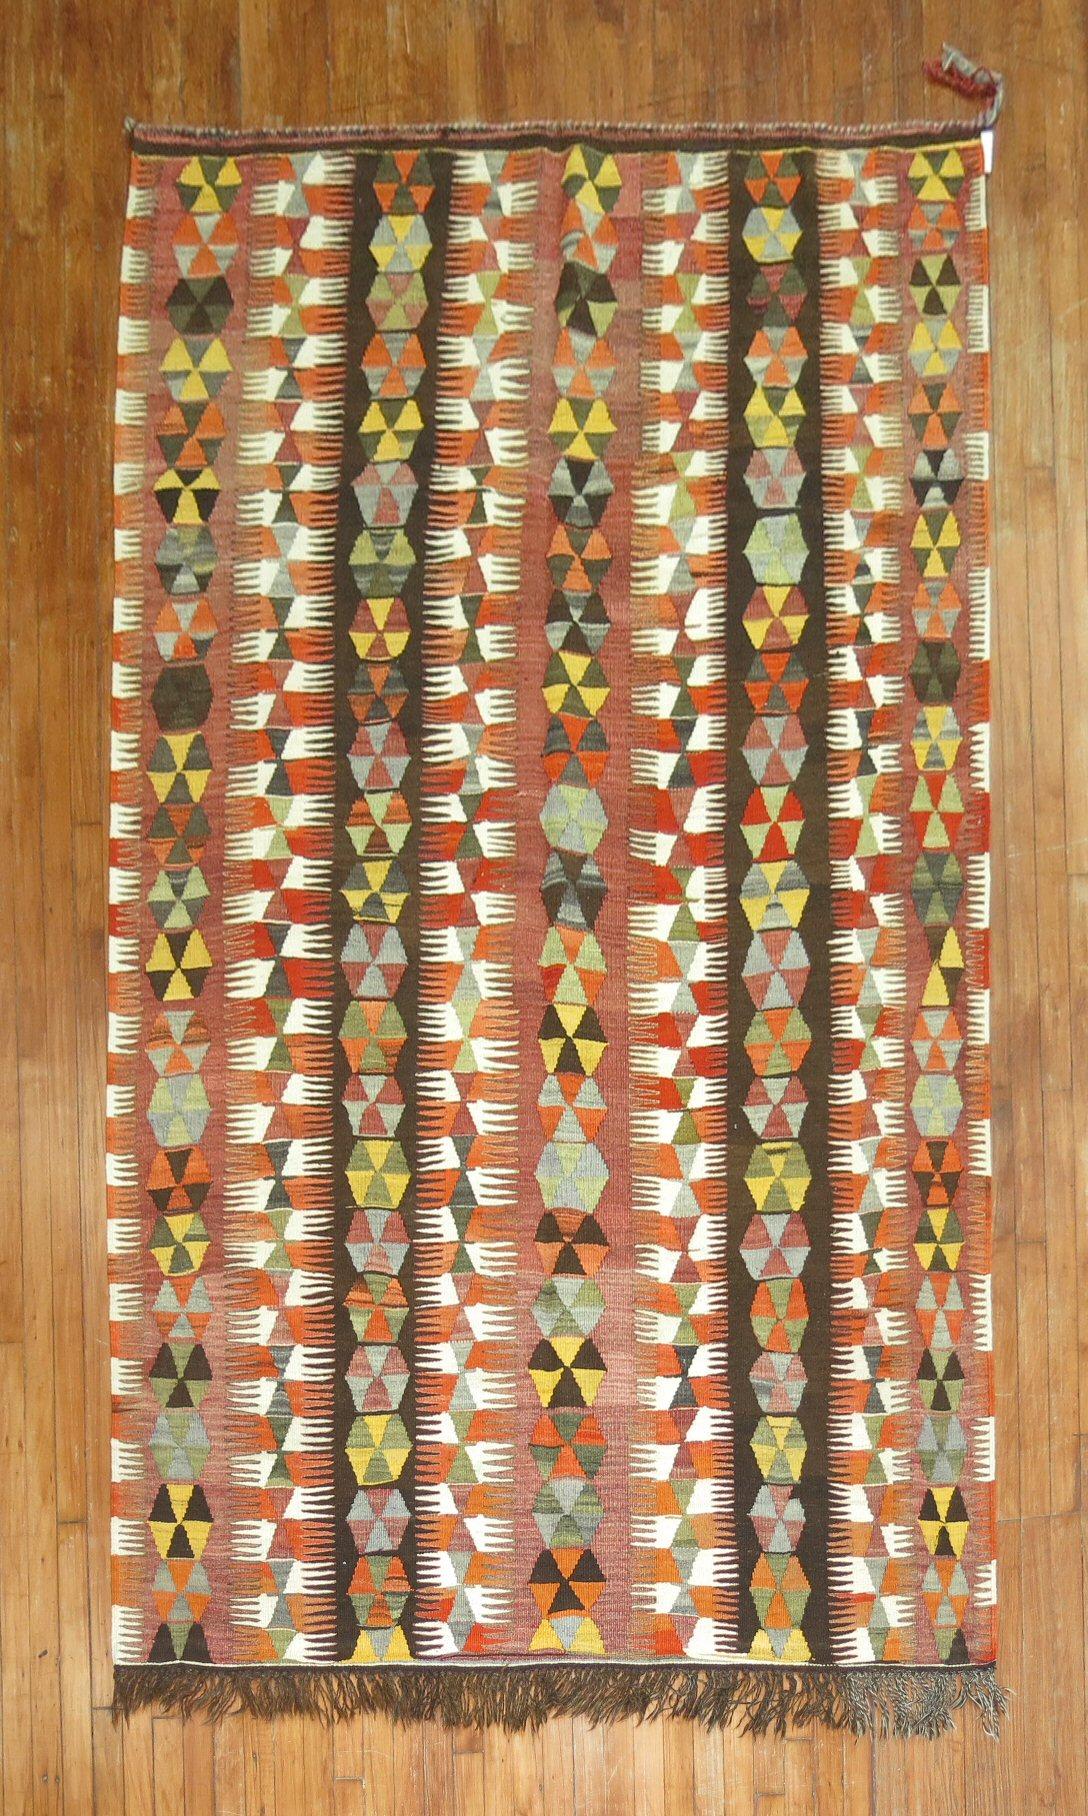 Mid 20th century Turkish Kilim with an all-over tribal design

Measures: 5'7'' x 9'6''.